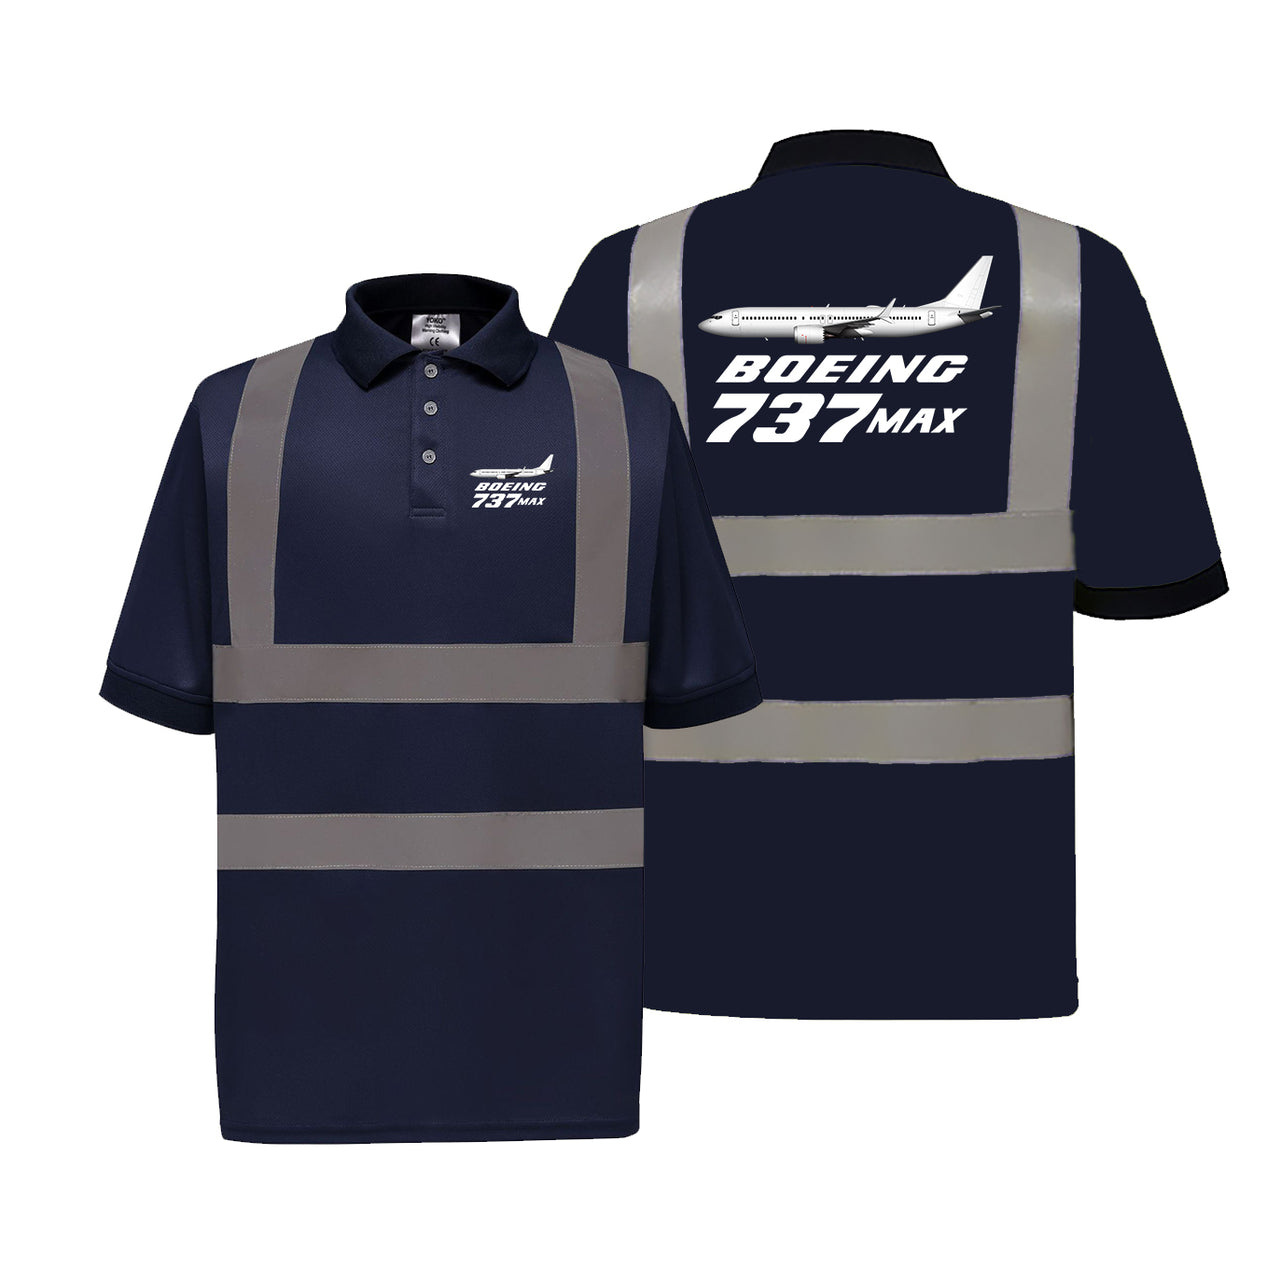 The Boeing 737Max Designed Reflective Polo T-Shirts